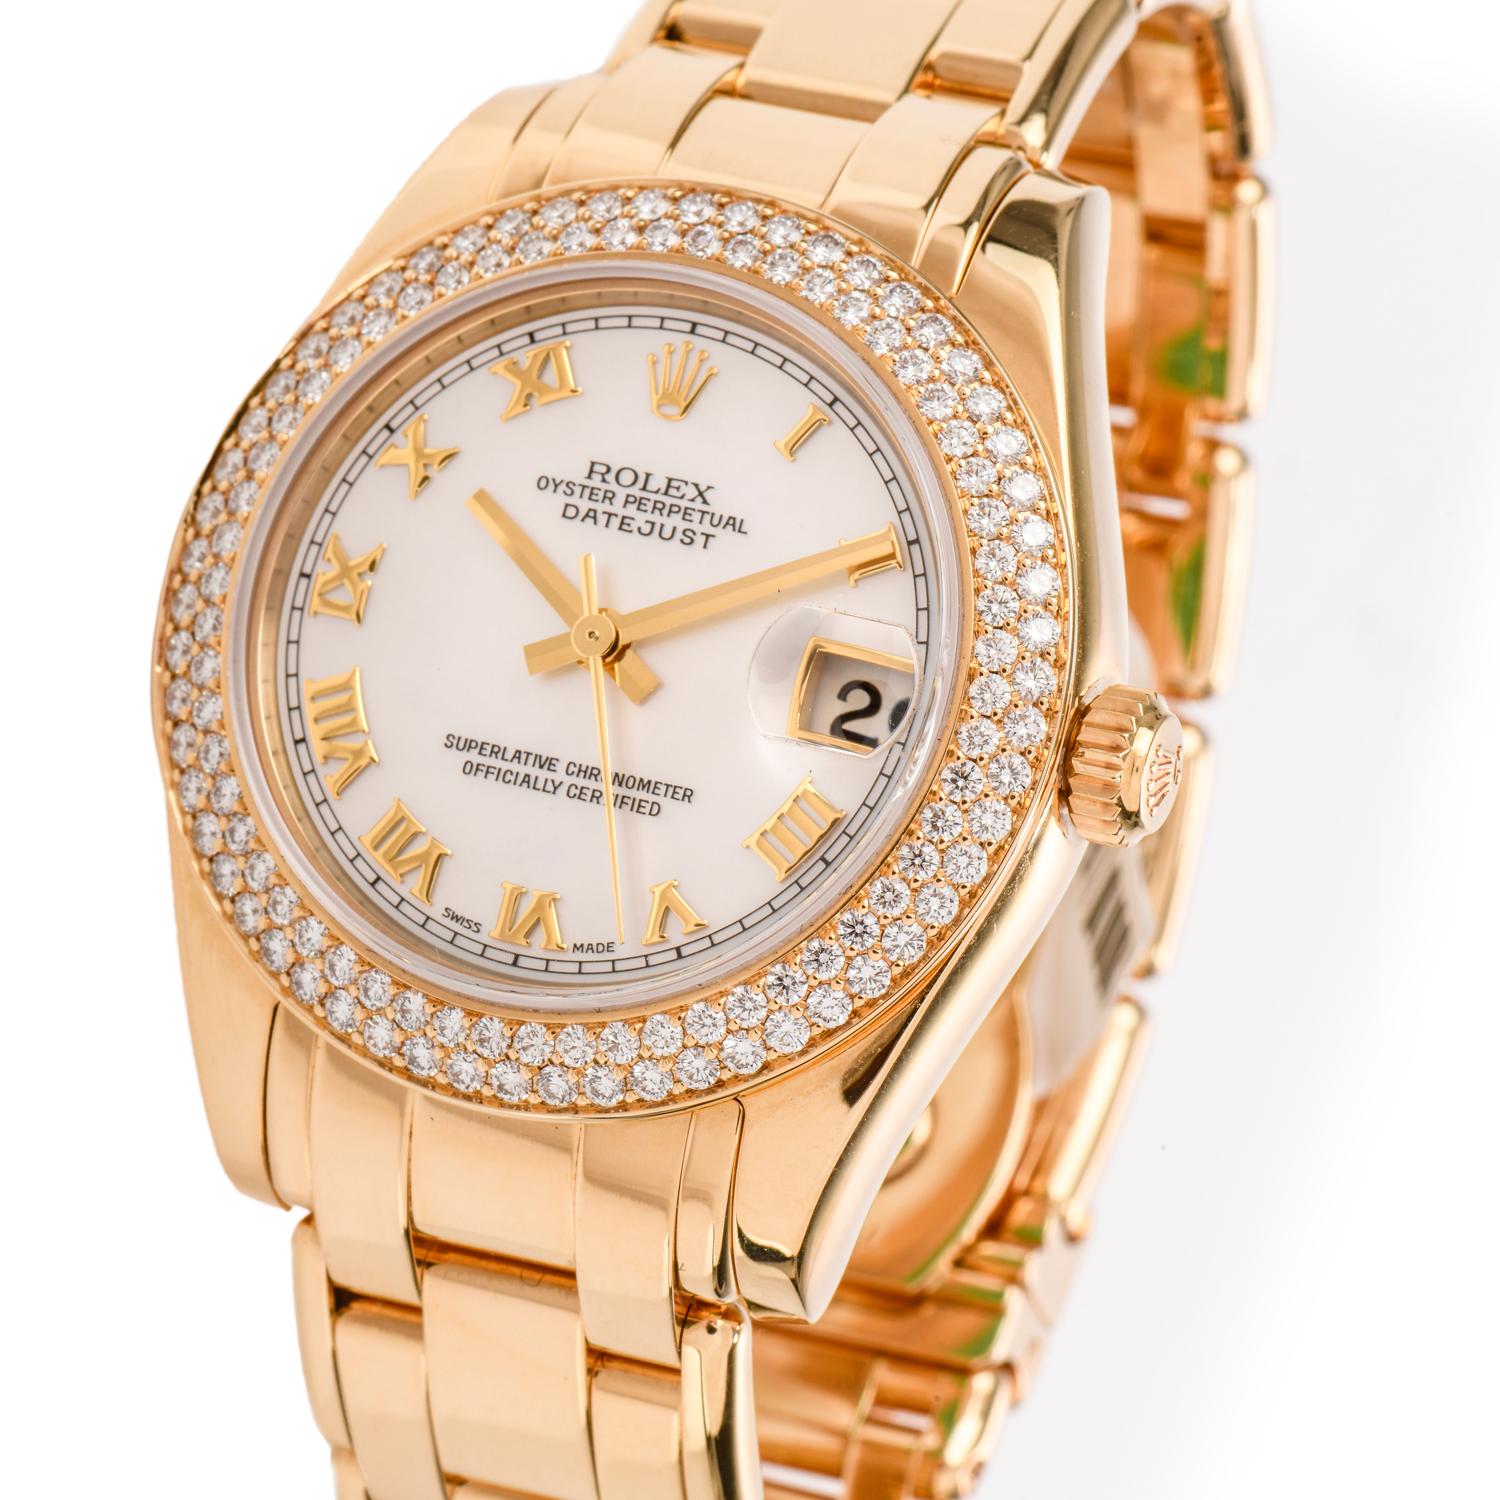 This pristine conditioned Ladies Pearlmaster 18K Rolex features

a mother of pearl dial with Roman numeral markers and a 2 row

Diamond Bezel ( Rolex factroty set diamond).

Movement:  Automatic

Crystal: Scratch resistant Sapphire Crystal 

Gold